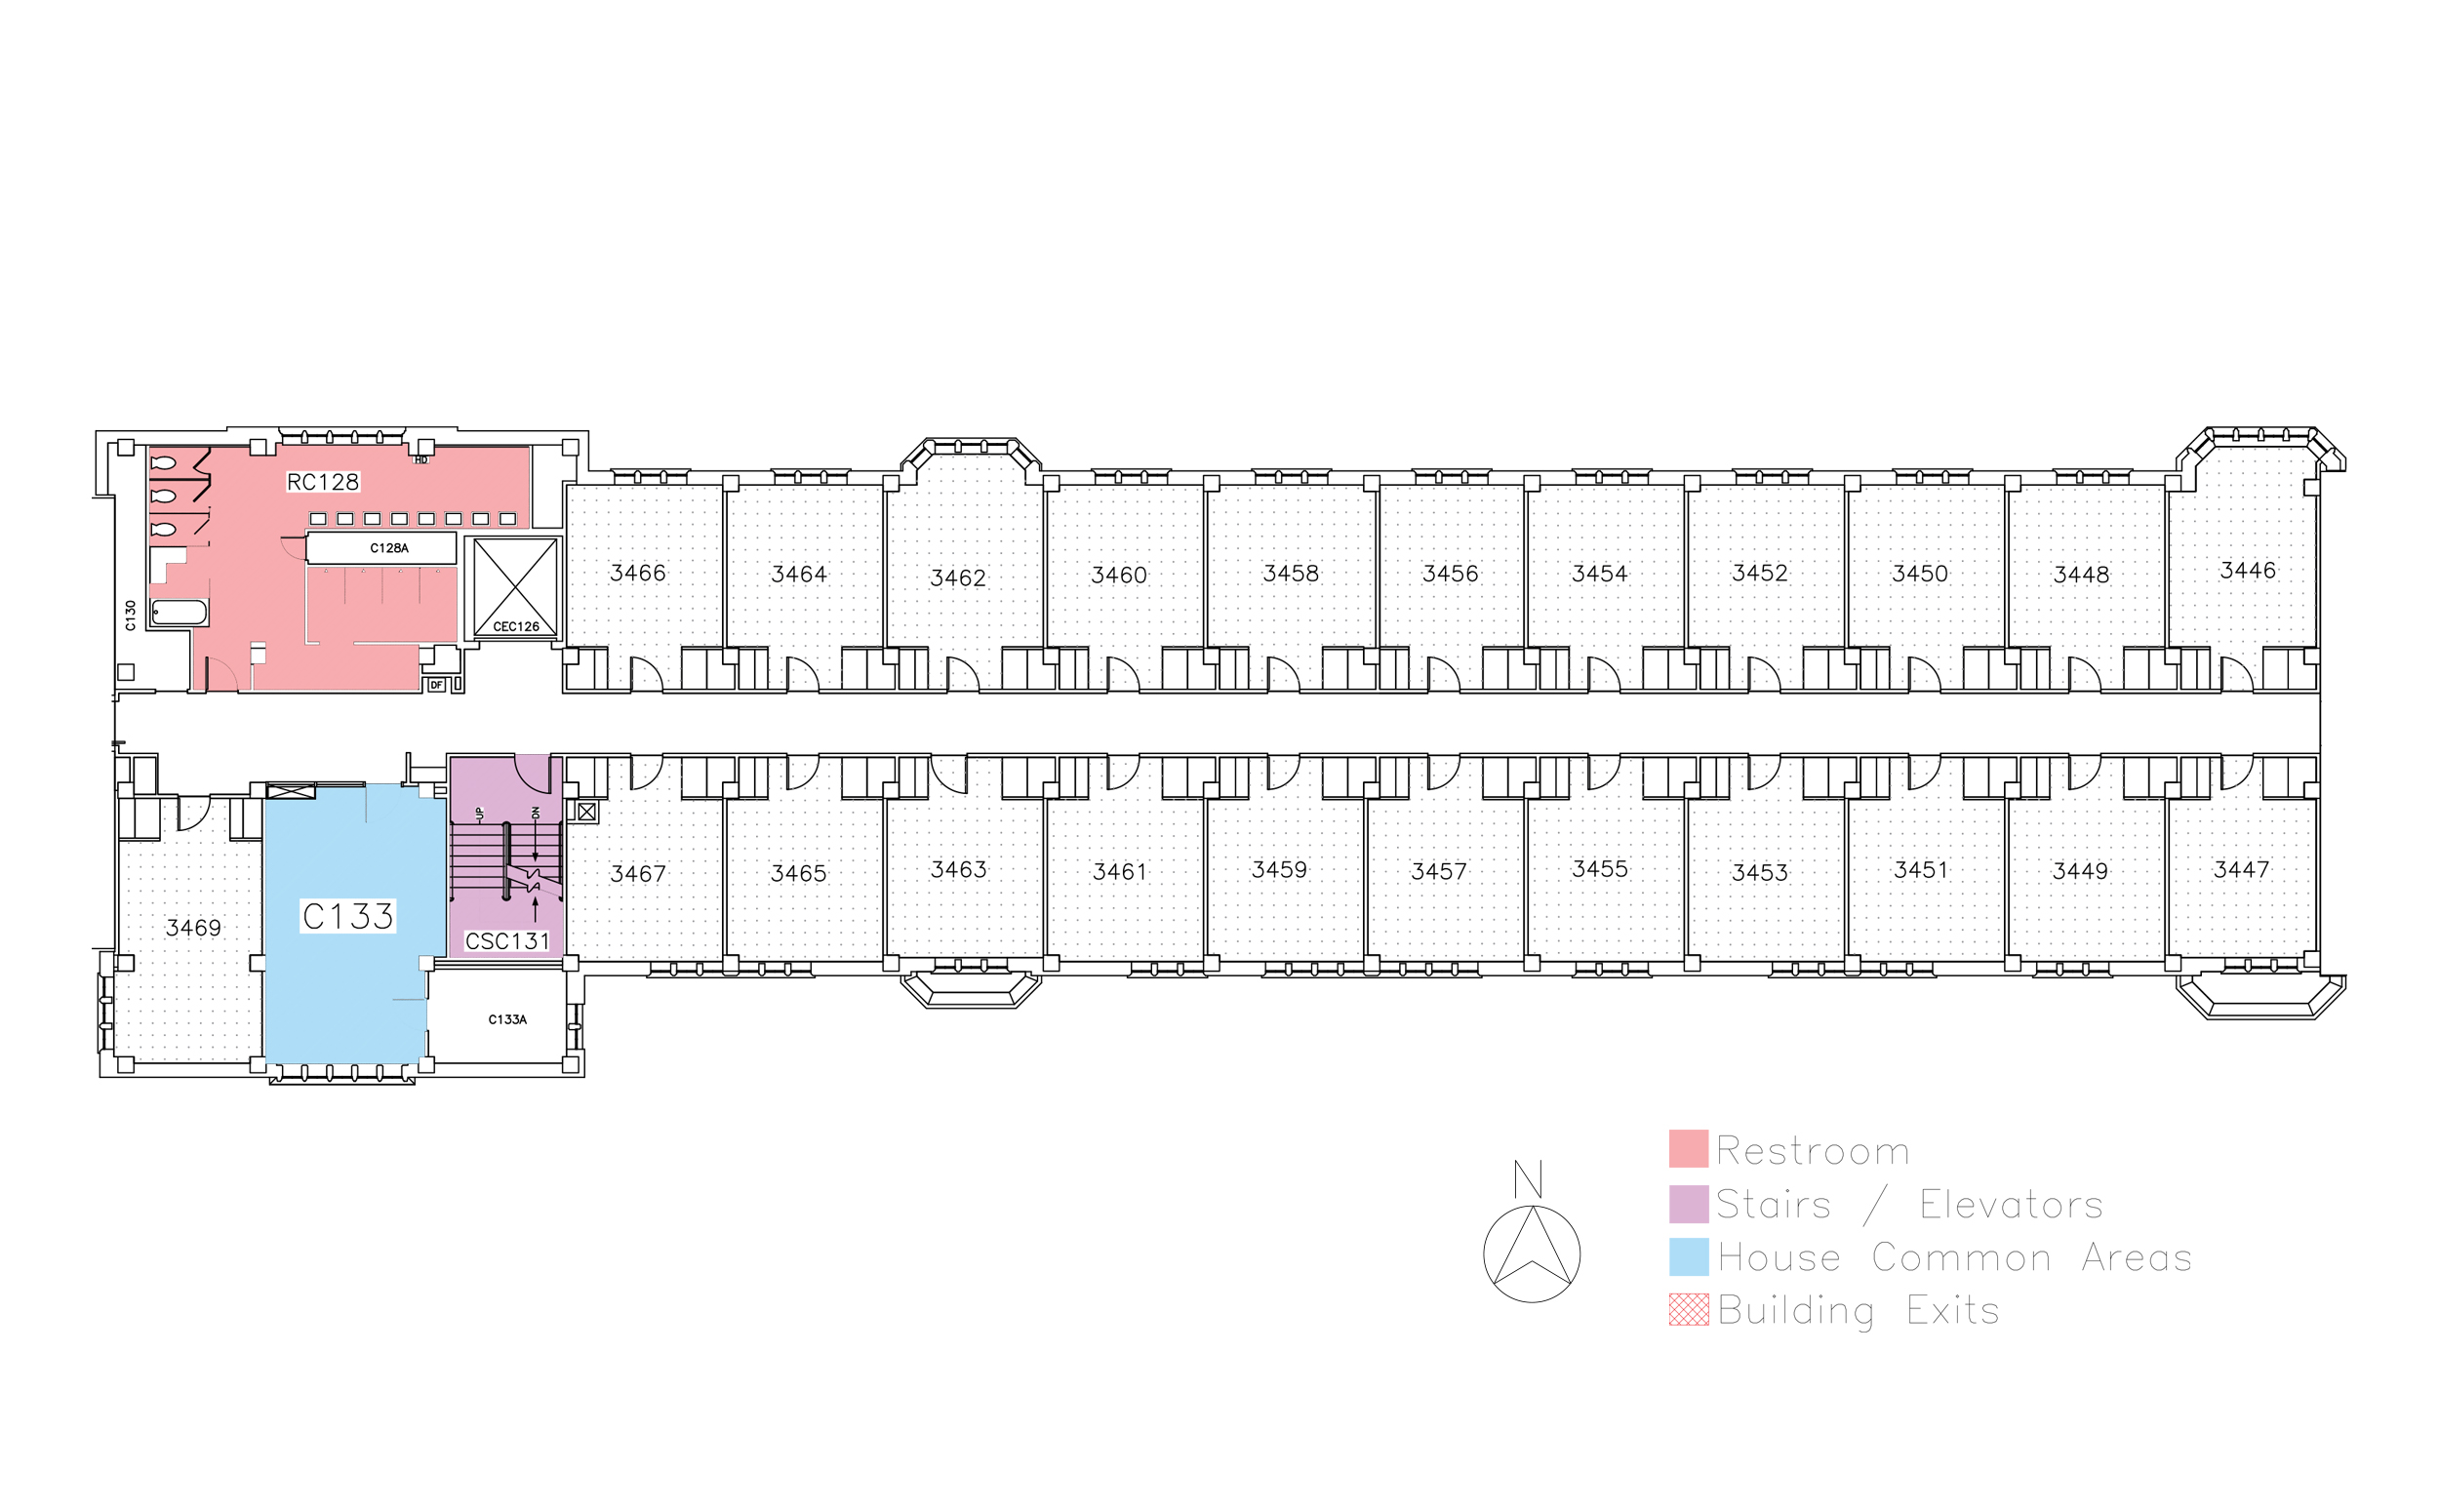 Murphy House, third floor in Friley Hall floor plan. Identifies the location of rooms, bathrooms and common space.